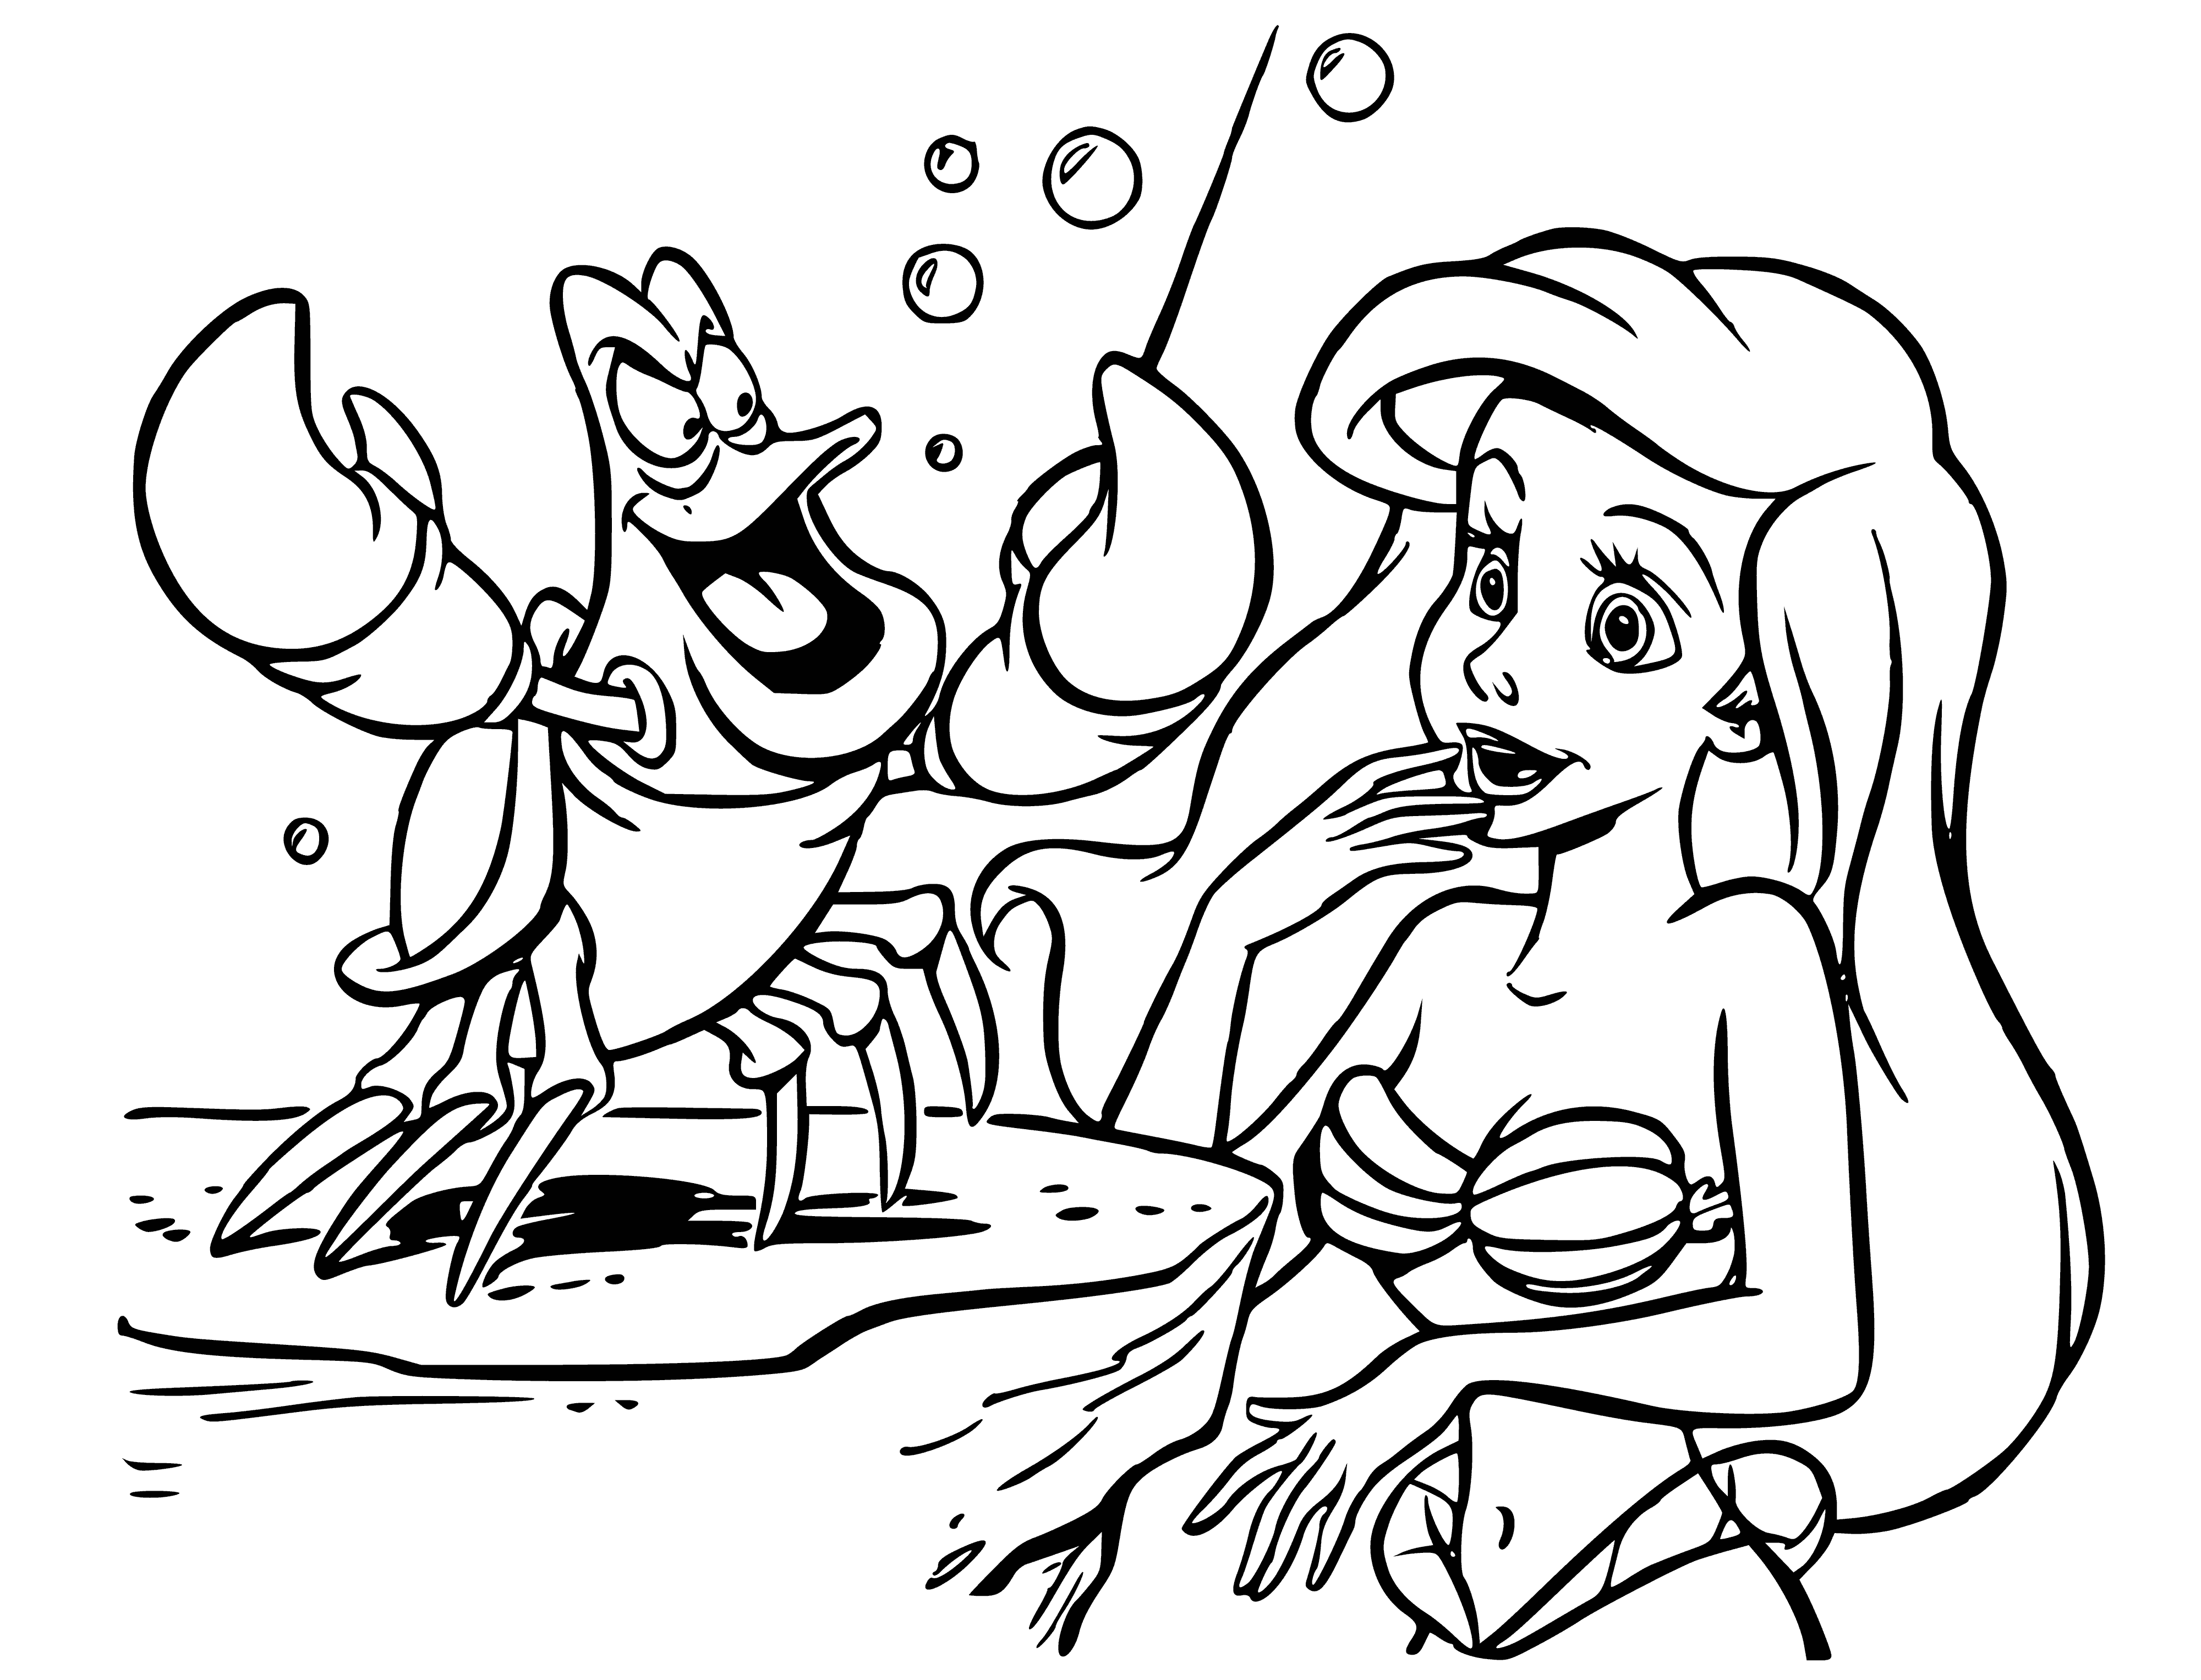 Sebastian and the Little Mermaid coloring page